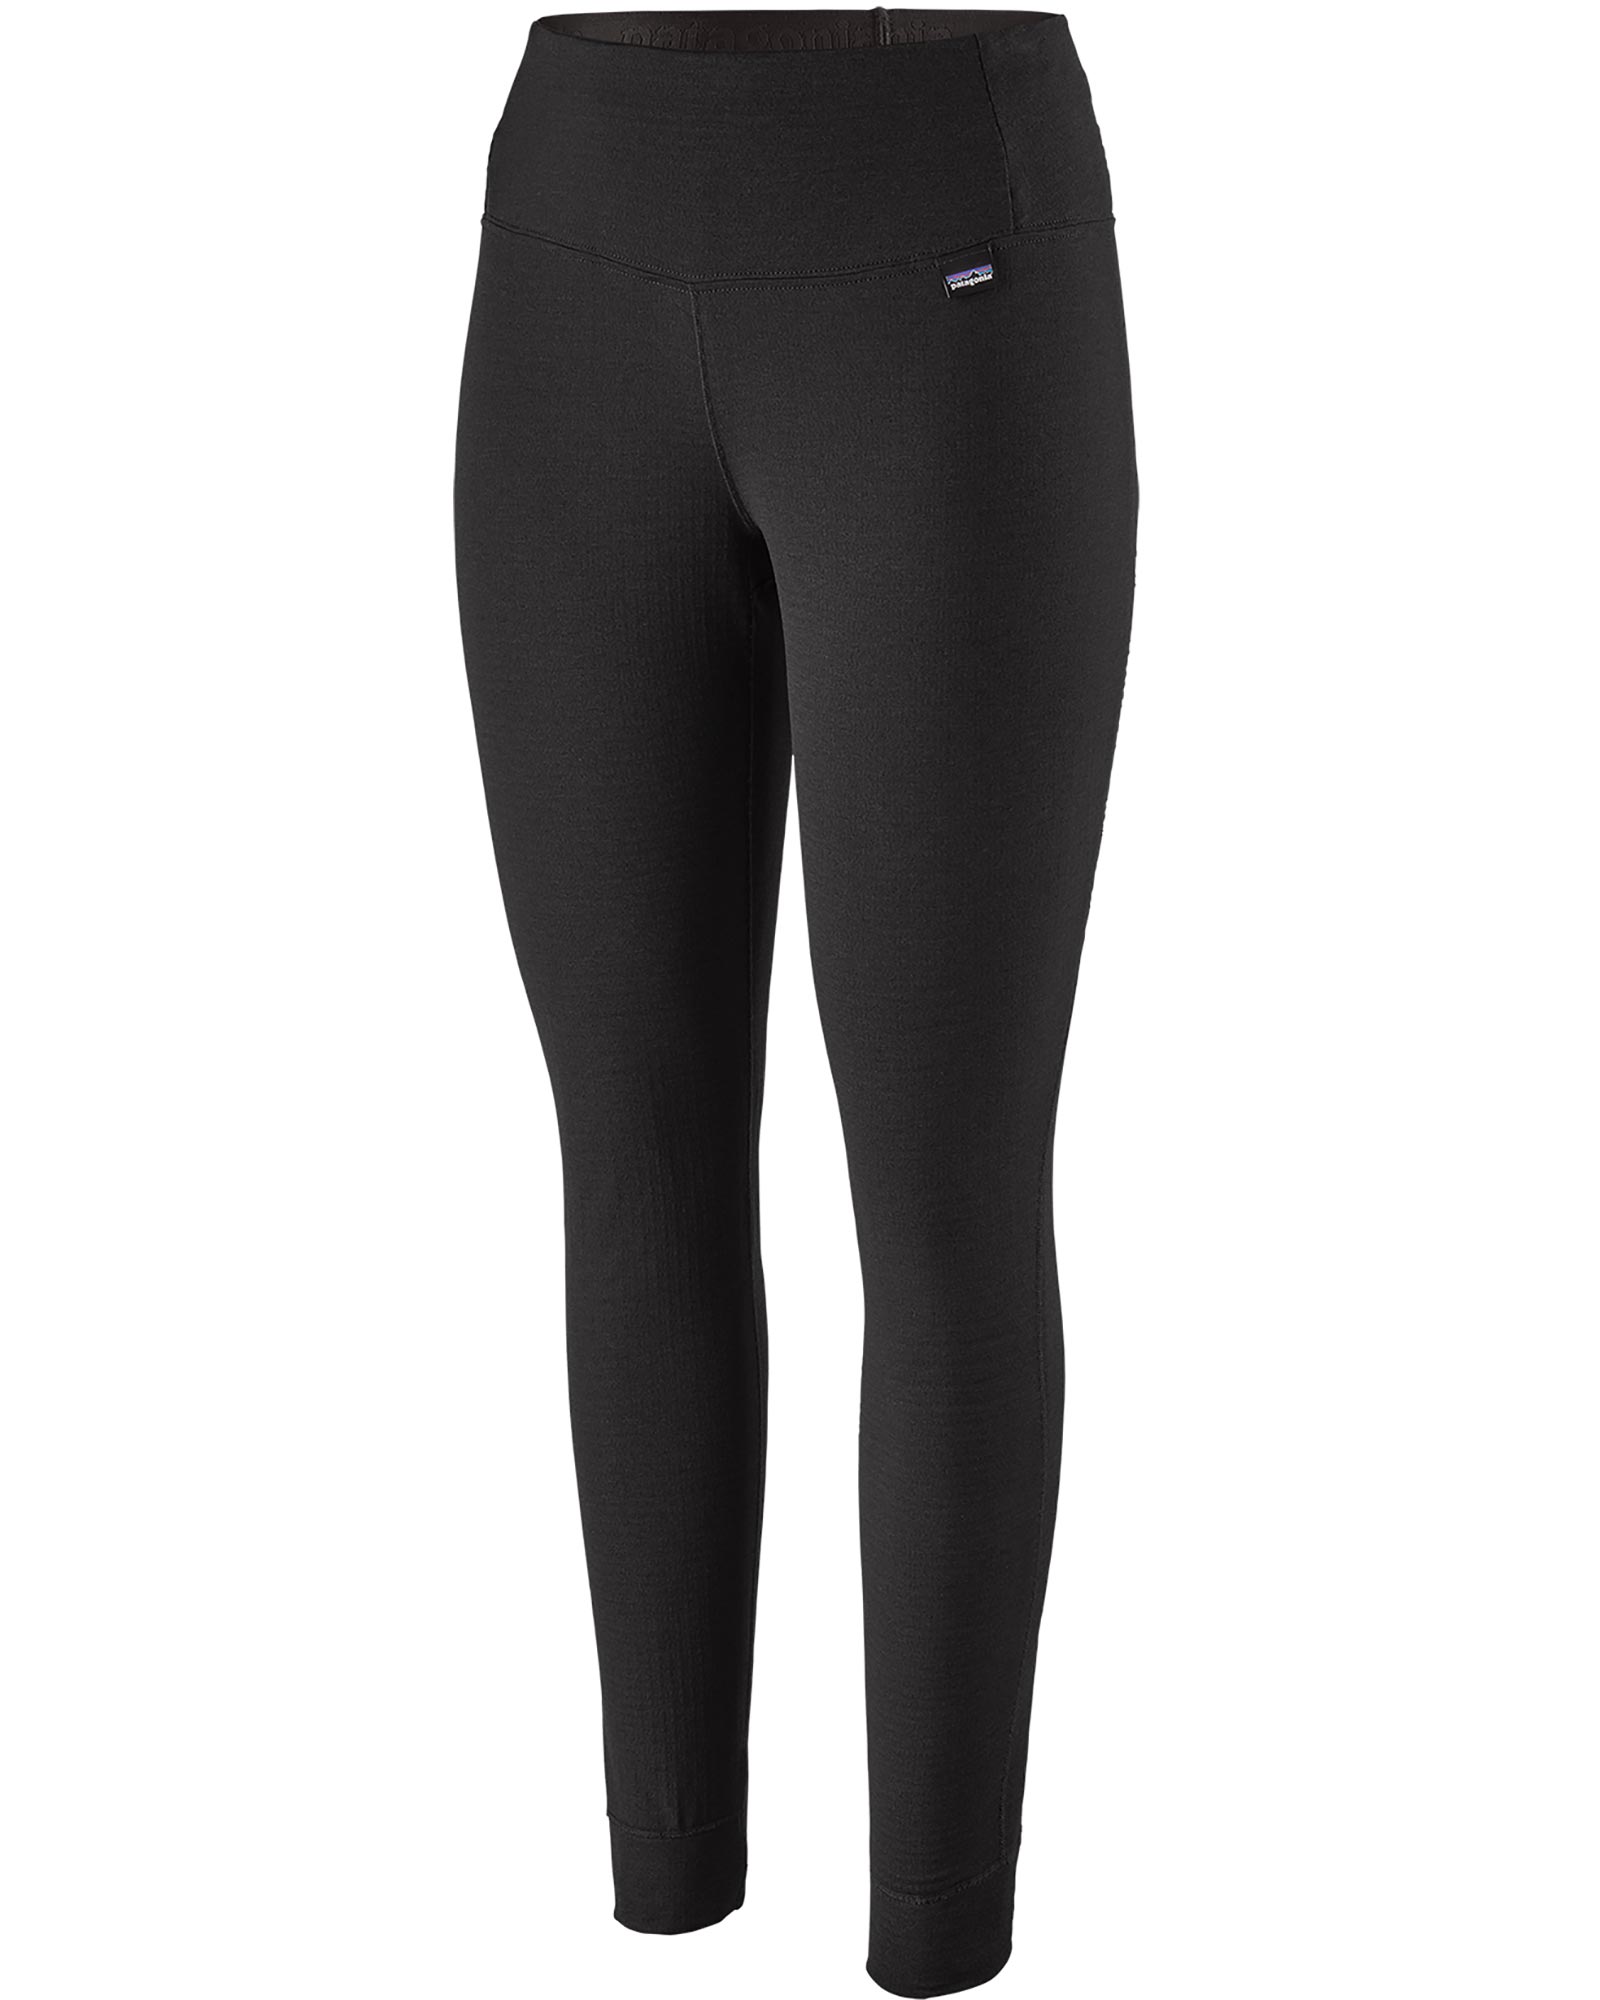 Patagonia Capilene Women’s Thermal Weight Tights - black L